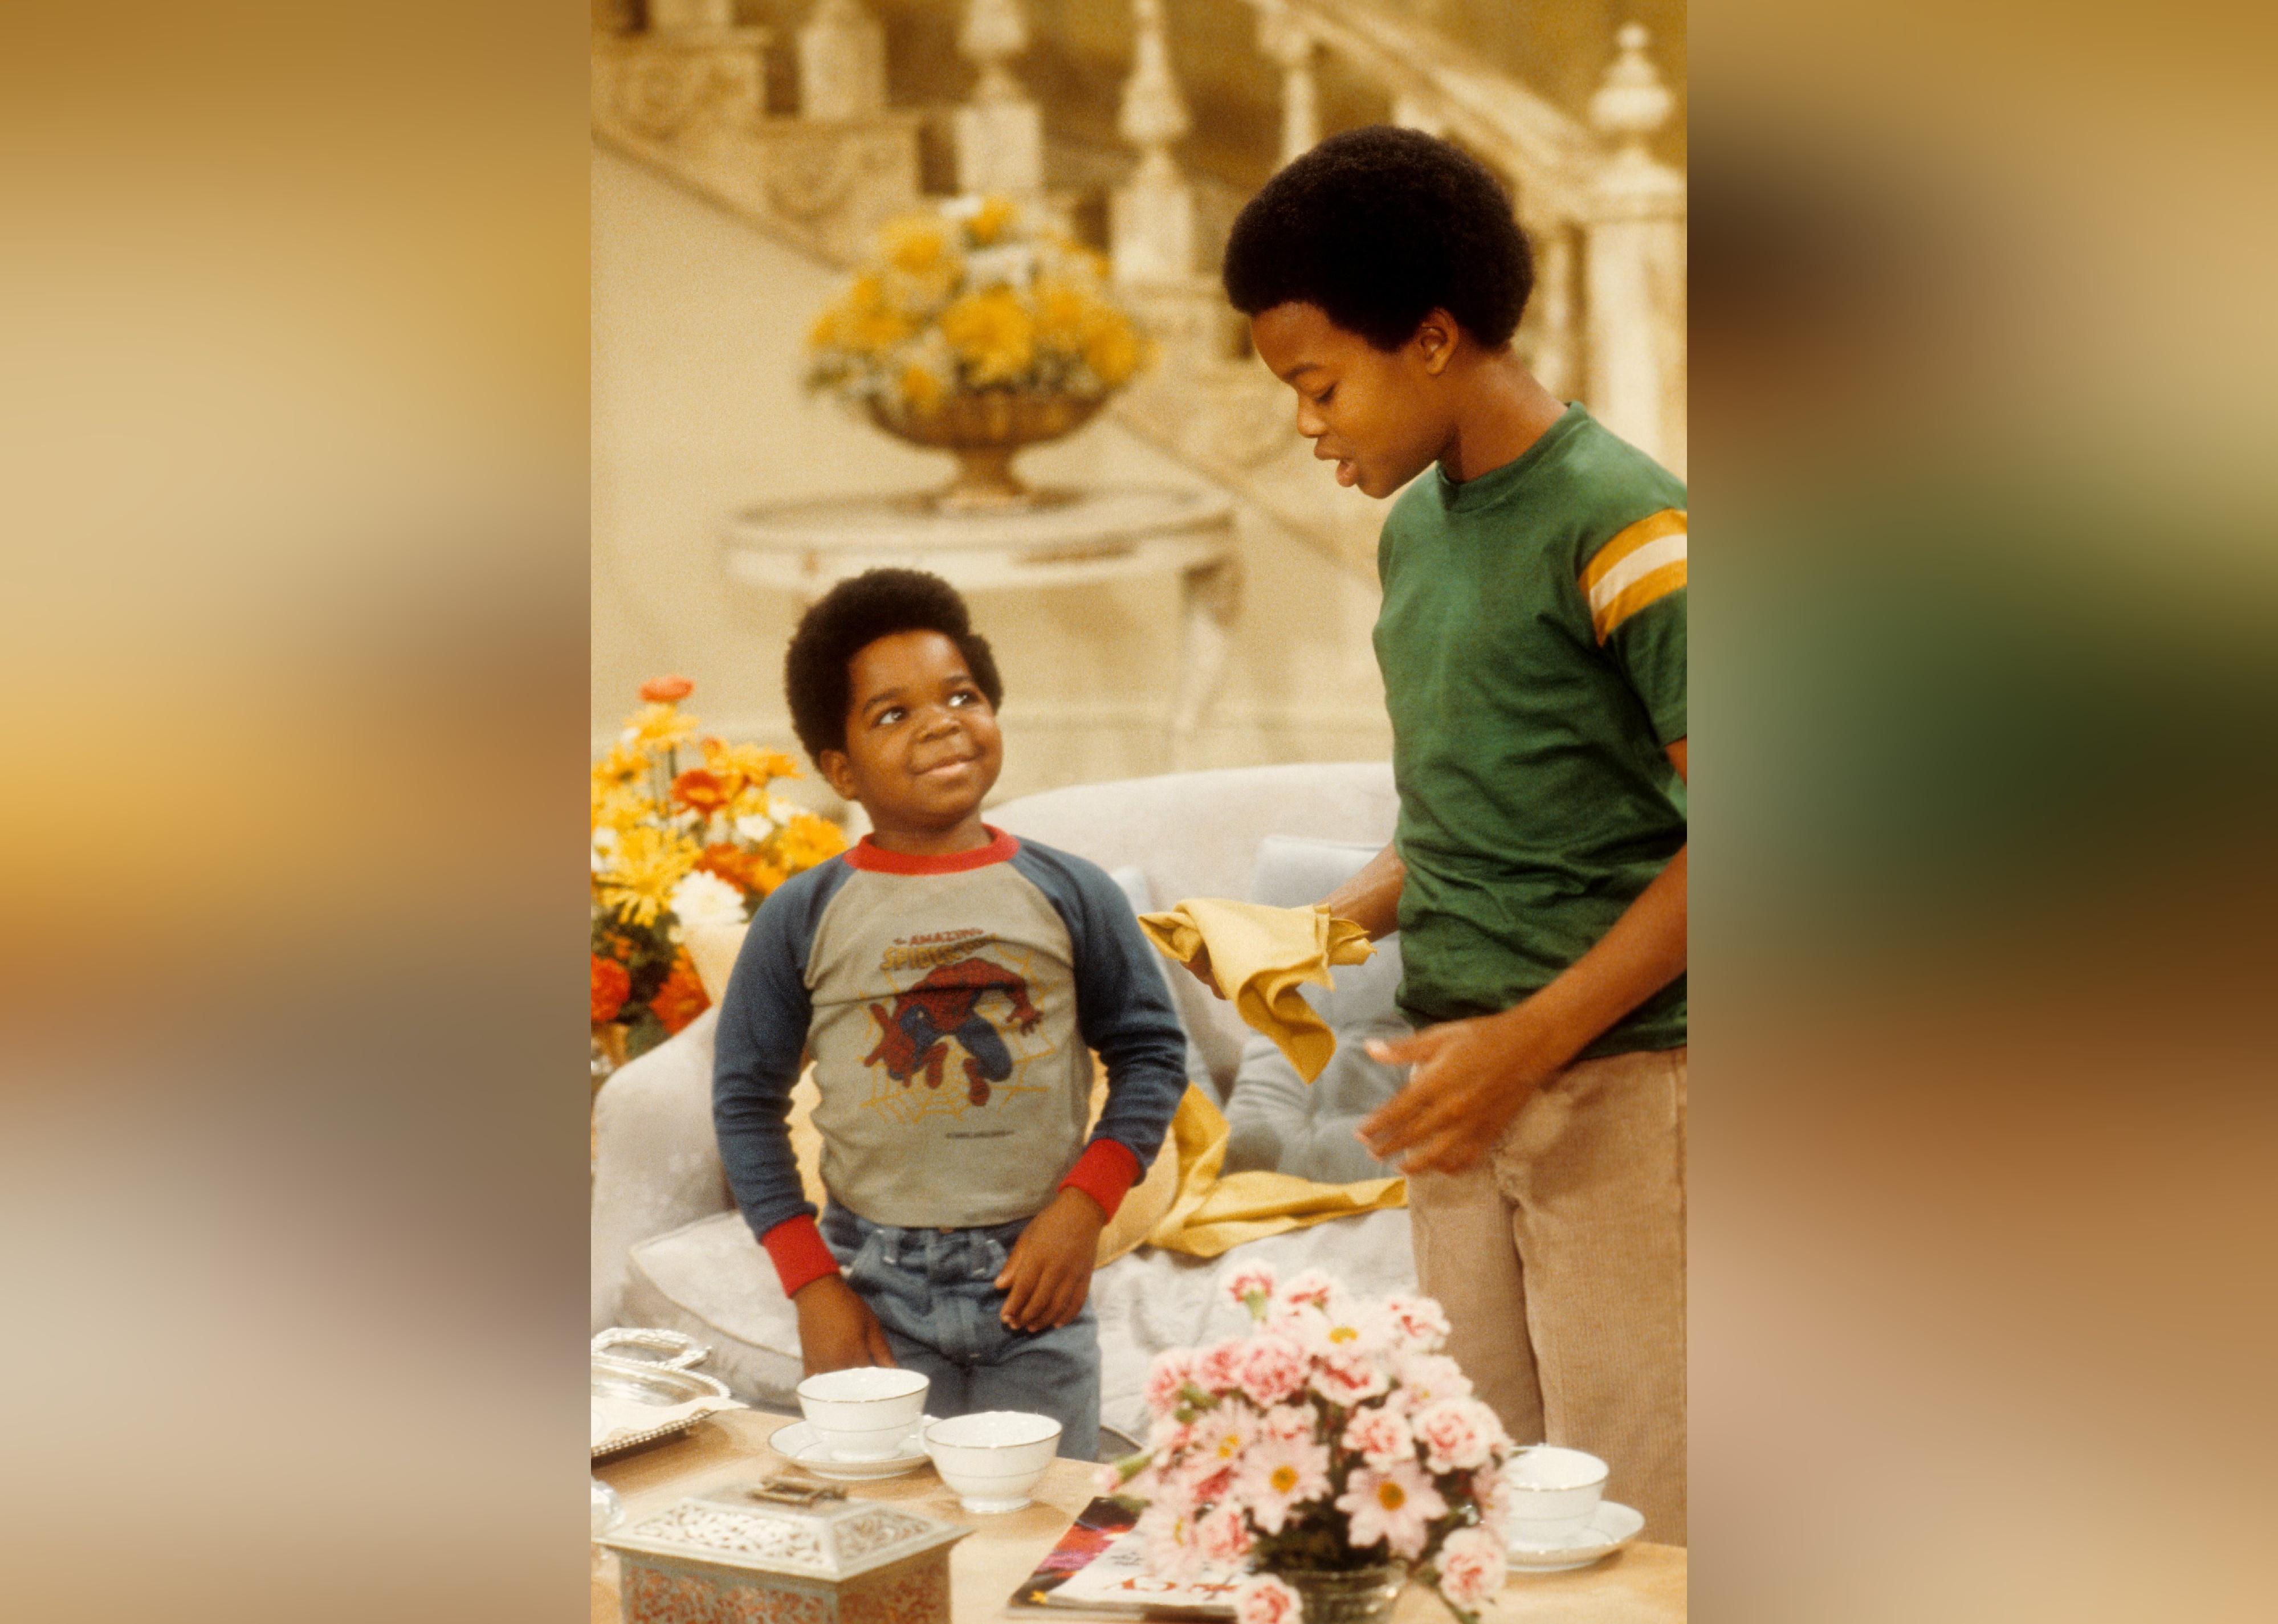 Actors Gary Coleman and Todd Bridges on the set of Diff'rent Strokes.